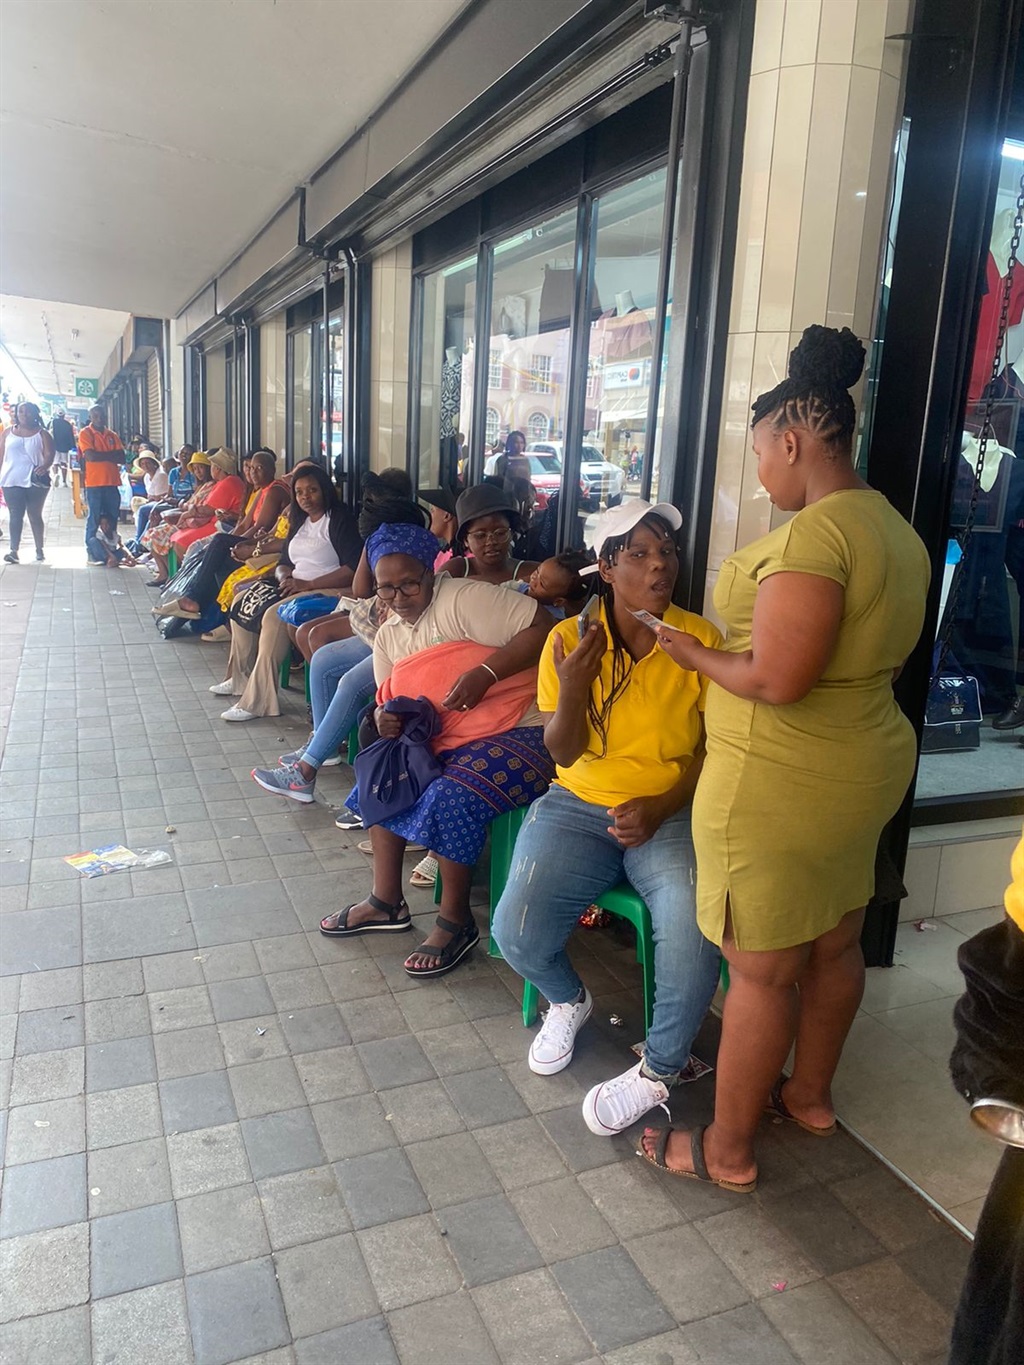 Mary's Outfitters store in the Pretoria CBD is still overflowing with last minute buyers. Photo by Keletso Mkhwanazi